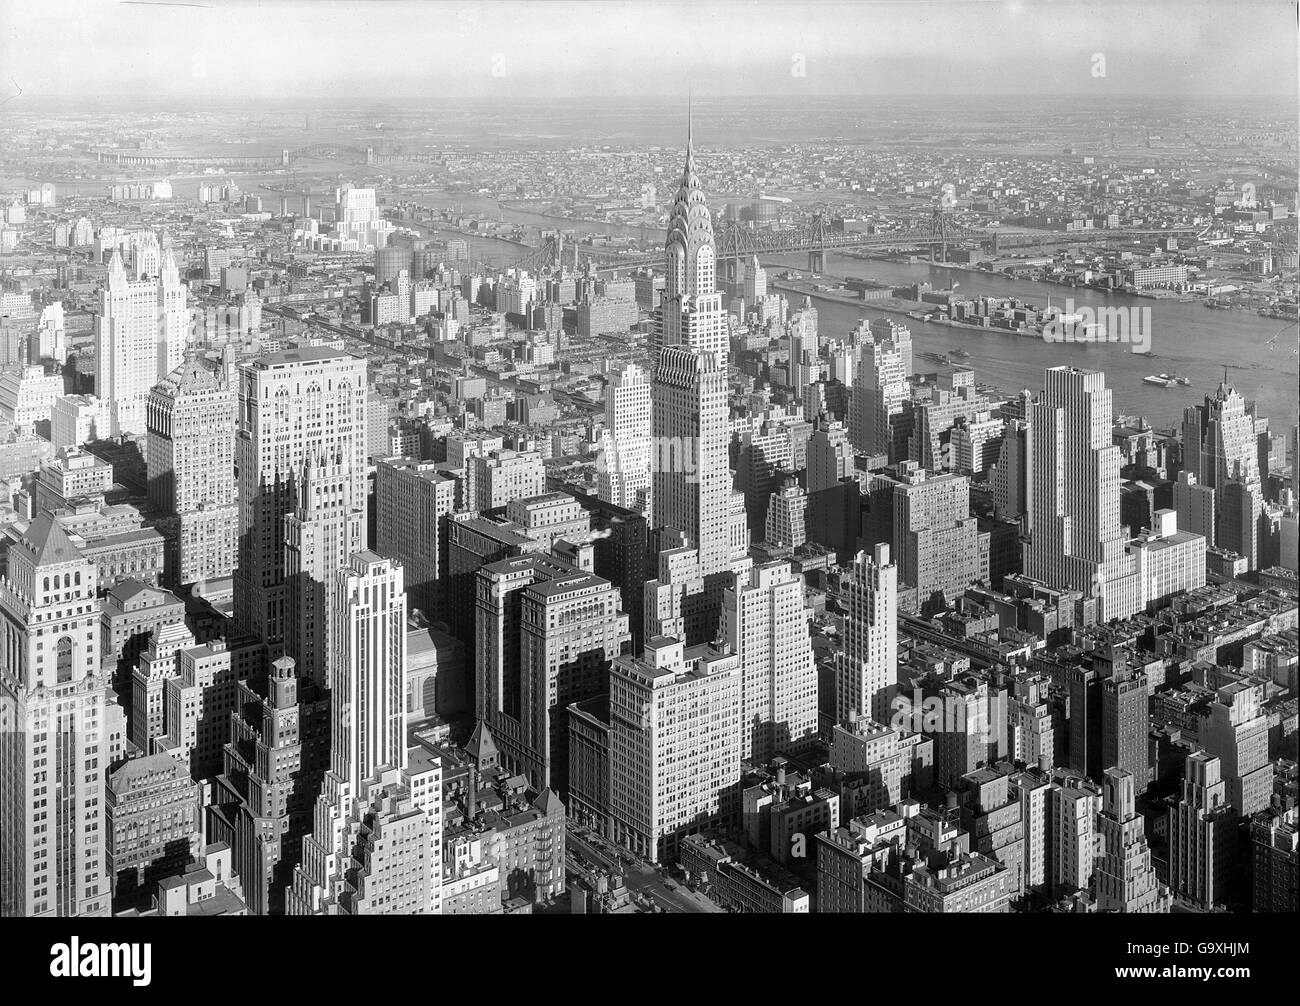 New York- The World's Greatest City: Thoroughly Illustrated 1931